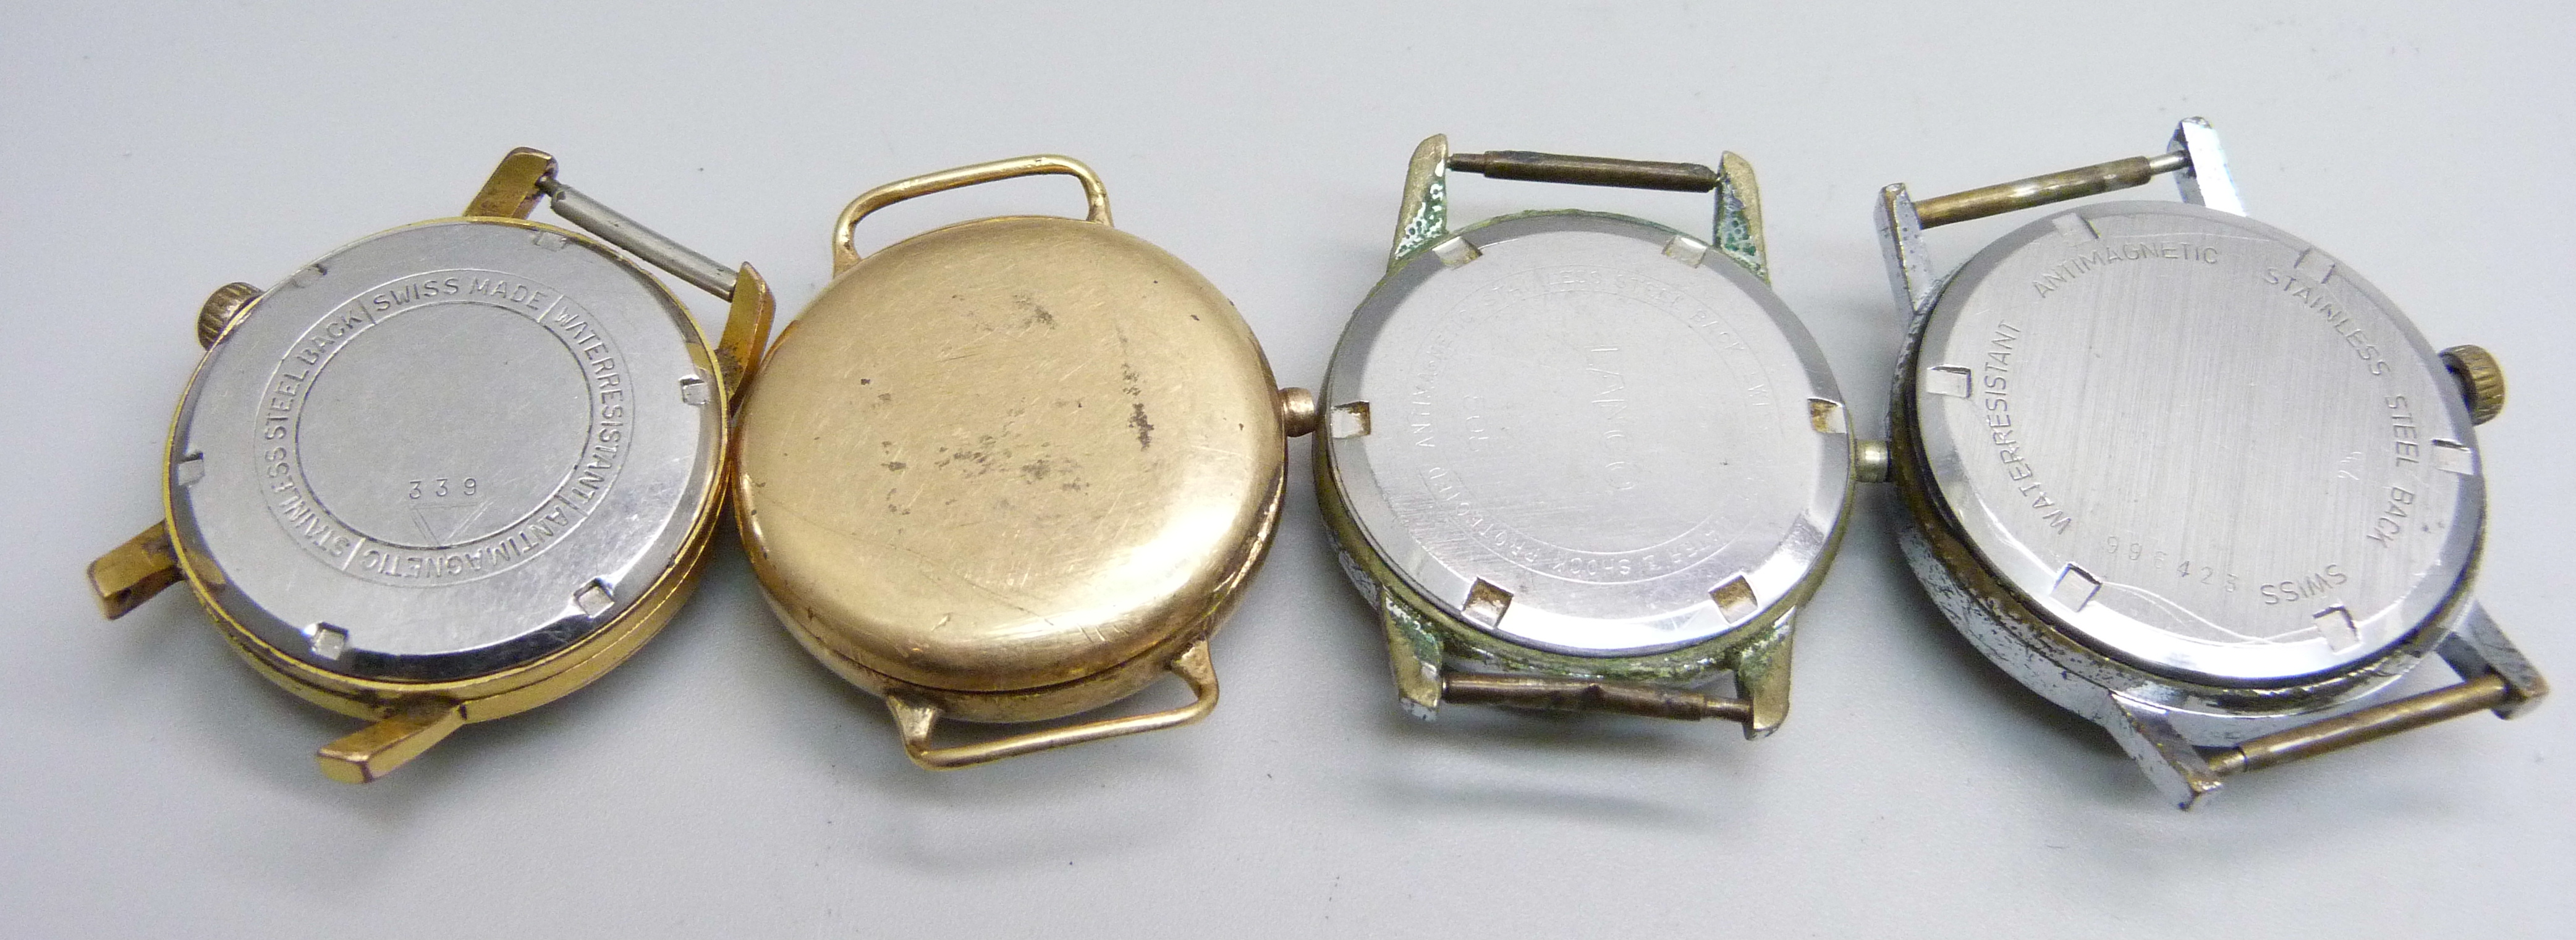 Four gentleman's wristwatches, two lacking crowns - Image 2 of 2